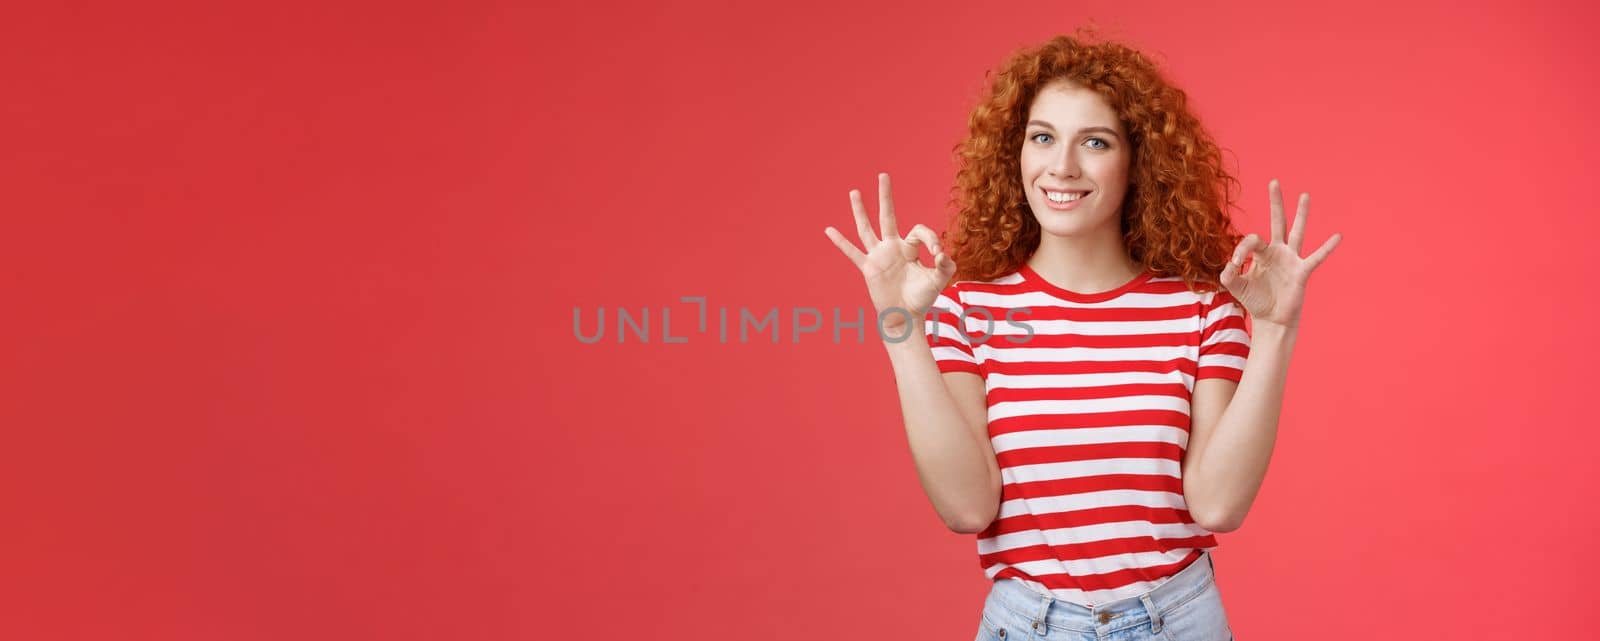 Fine relax everything perfect. Satisfied good-looking redhead cheerful sassy girlfriend curly haristyle show okay ok confirm gesture smiling approval agree good terms stand red background.